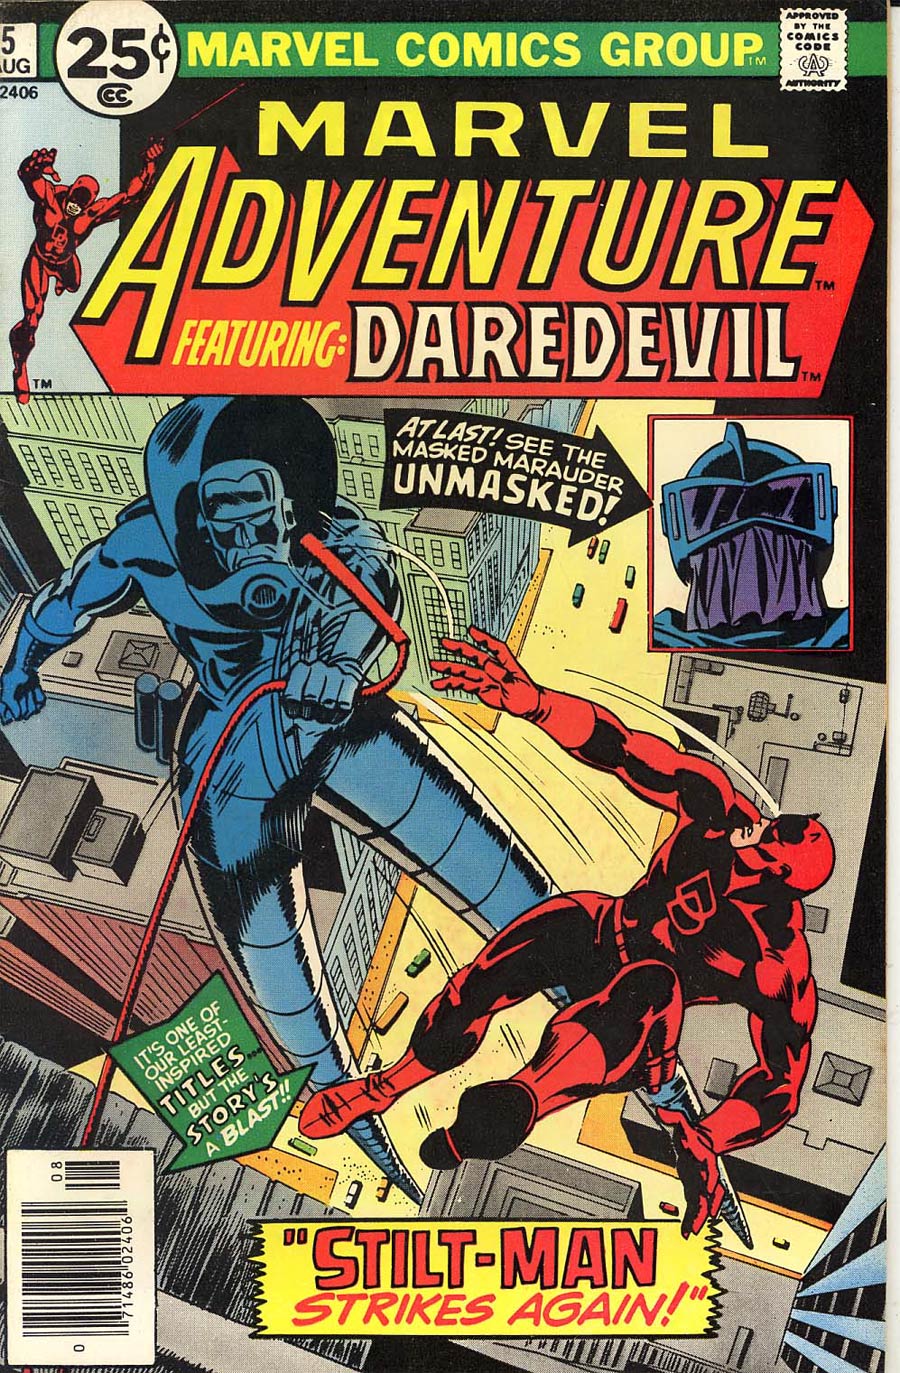 Marvel Adventure Featuring Daredevil #5 Cover A 25 Cent Regular Cover